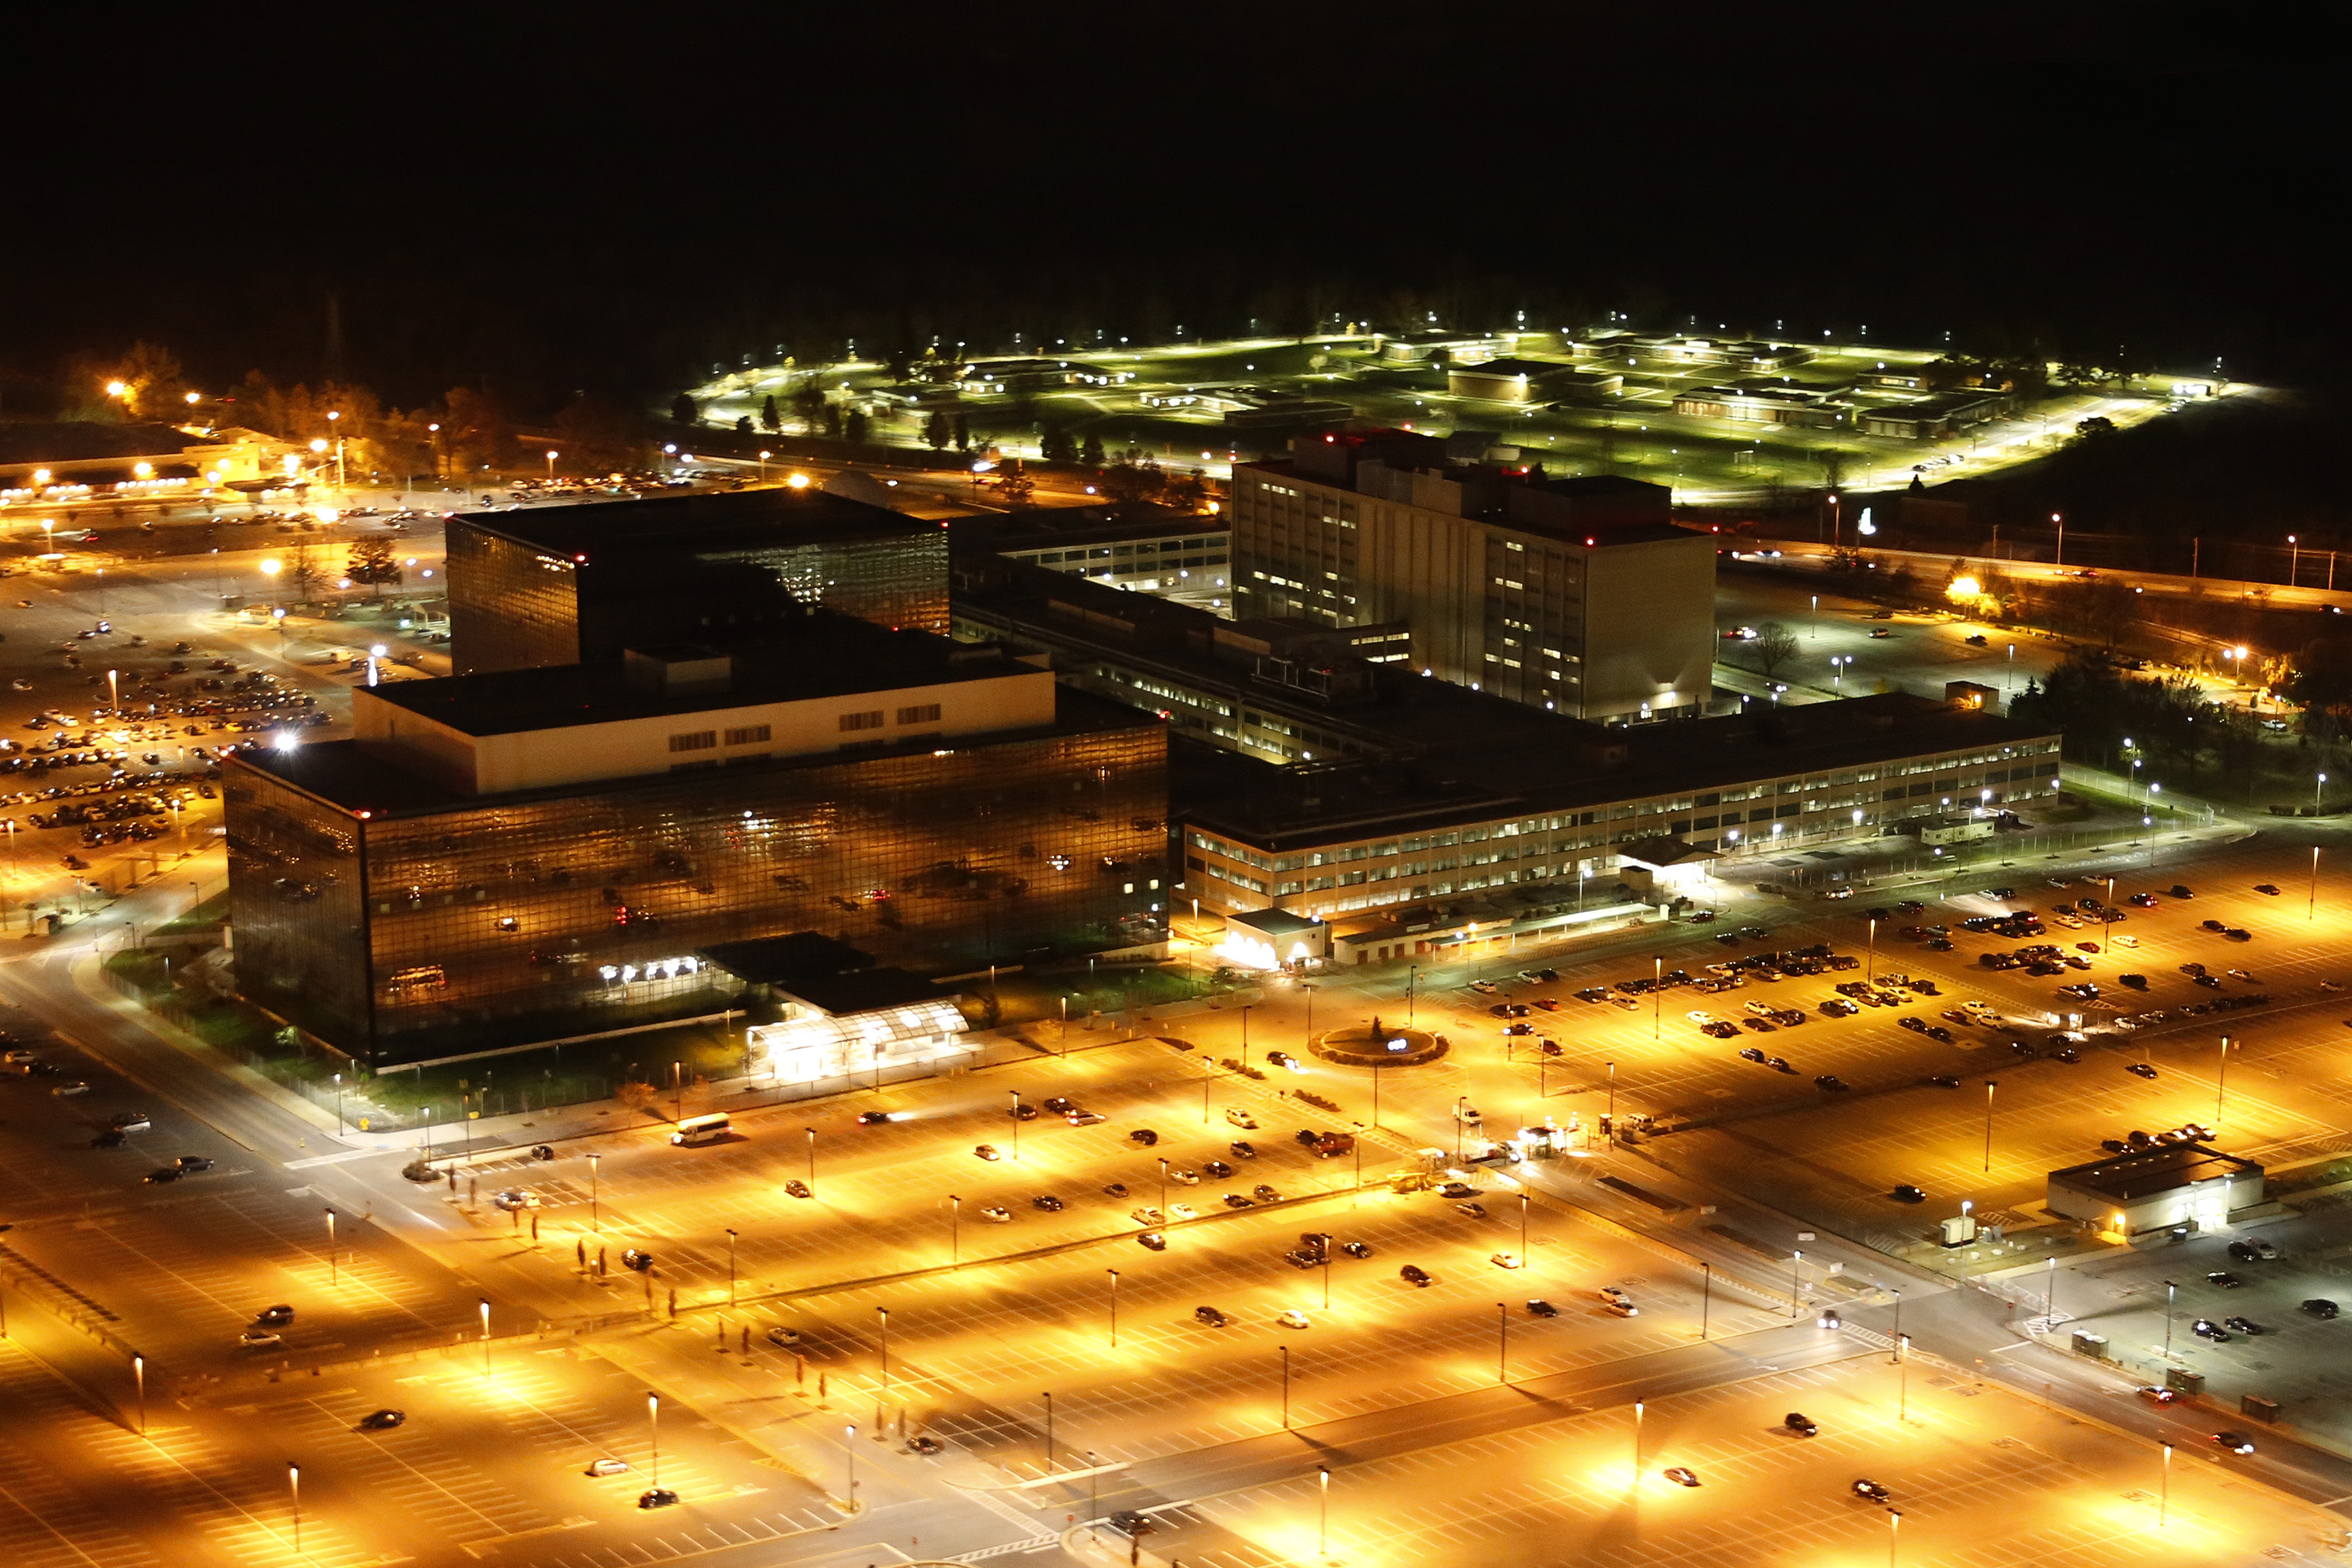 With a 2013 budget request of approximately $10.8 billion, the NSA is the second-largest agency in the U.S. intelligence community. It is headquartered in Fort Meade, Maryland